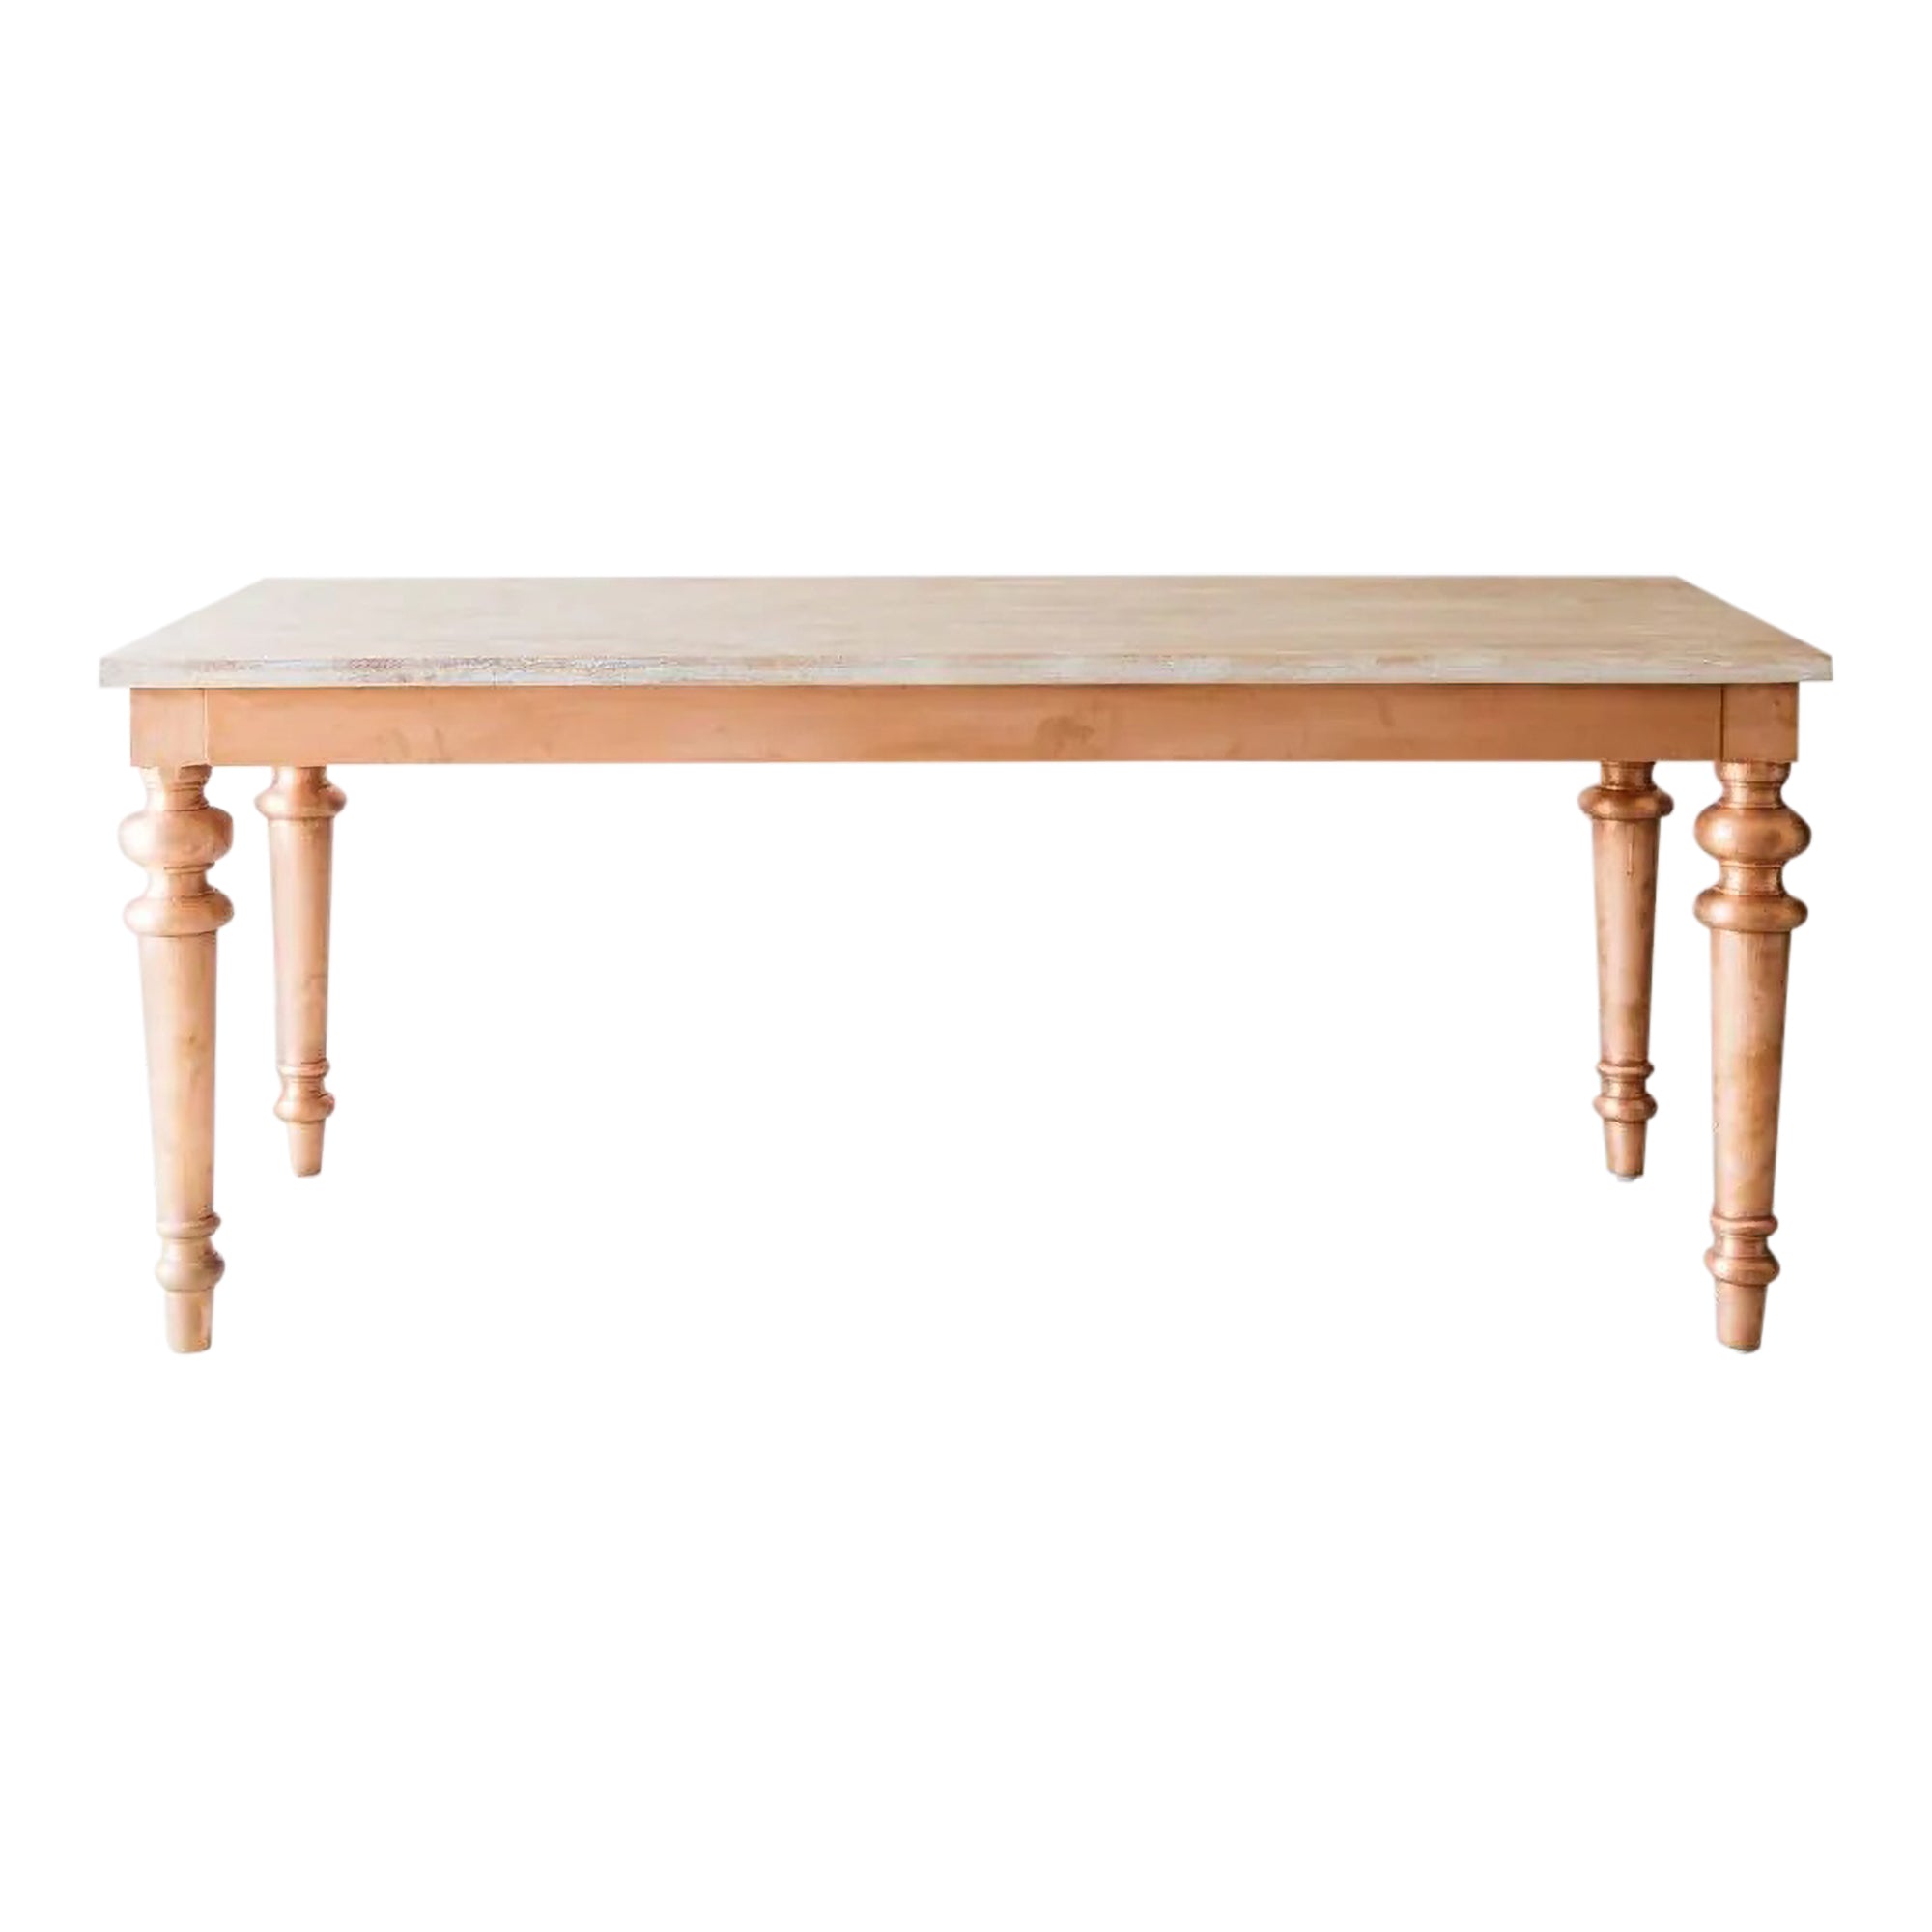 Six Seater Dining Table With Copper Legs